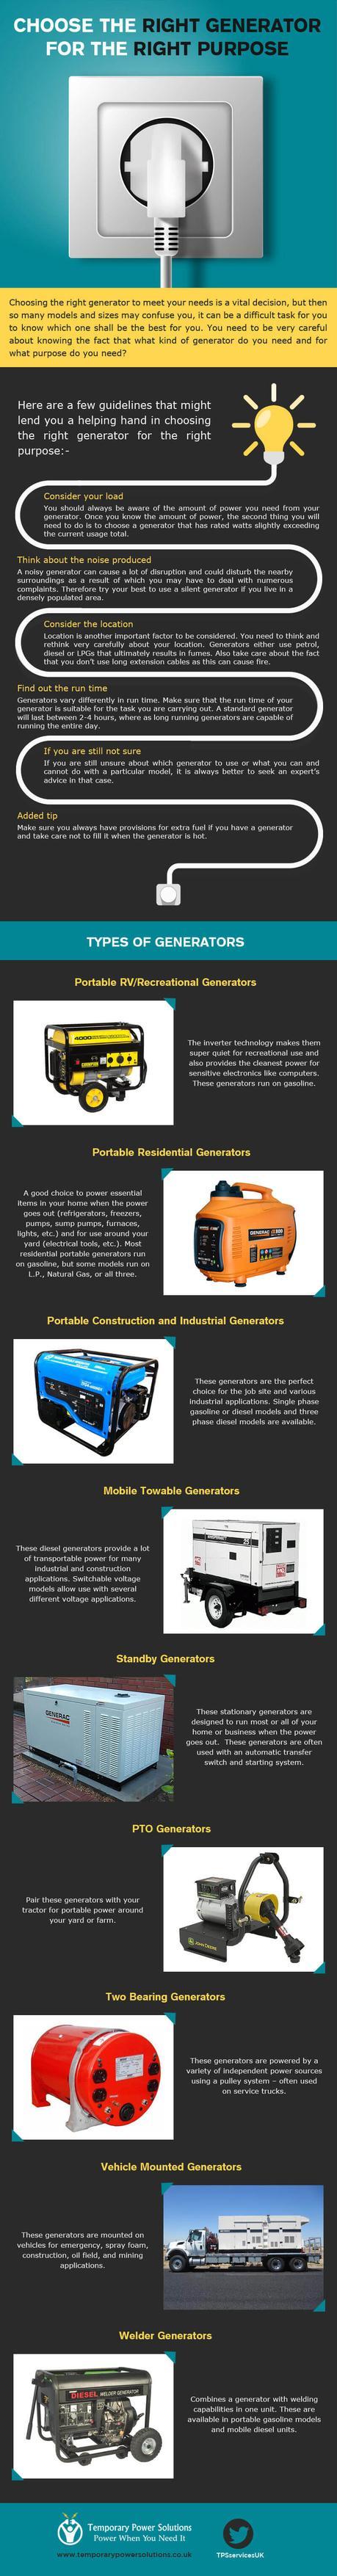 Choose the Right Generator for the Right Purpose [Infographic]